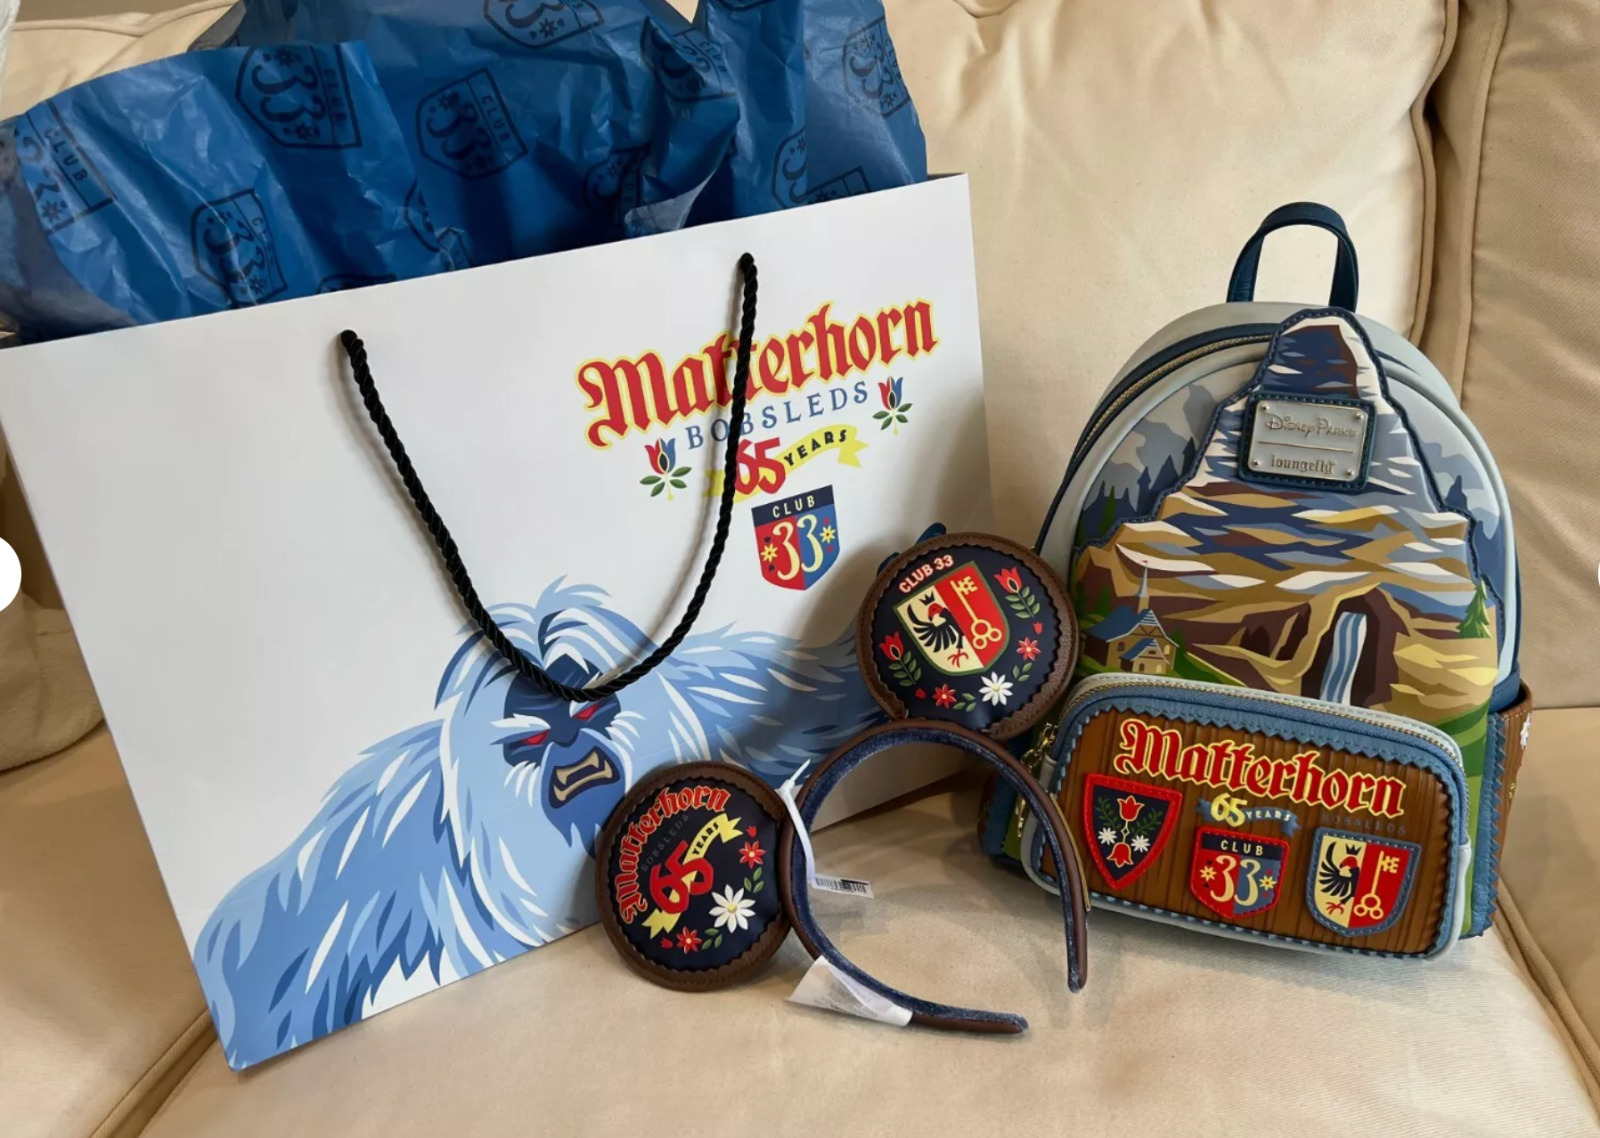 Club 33 Loungefly Backpack & Ears celebrating 65th Anniversary of the Matterhorn